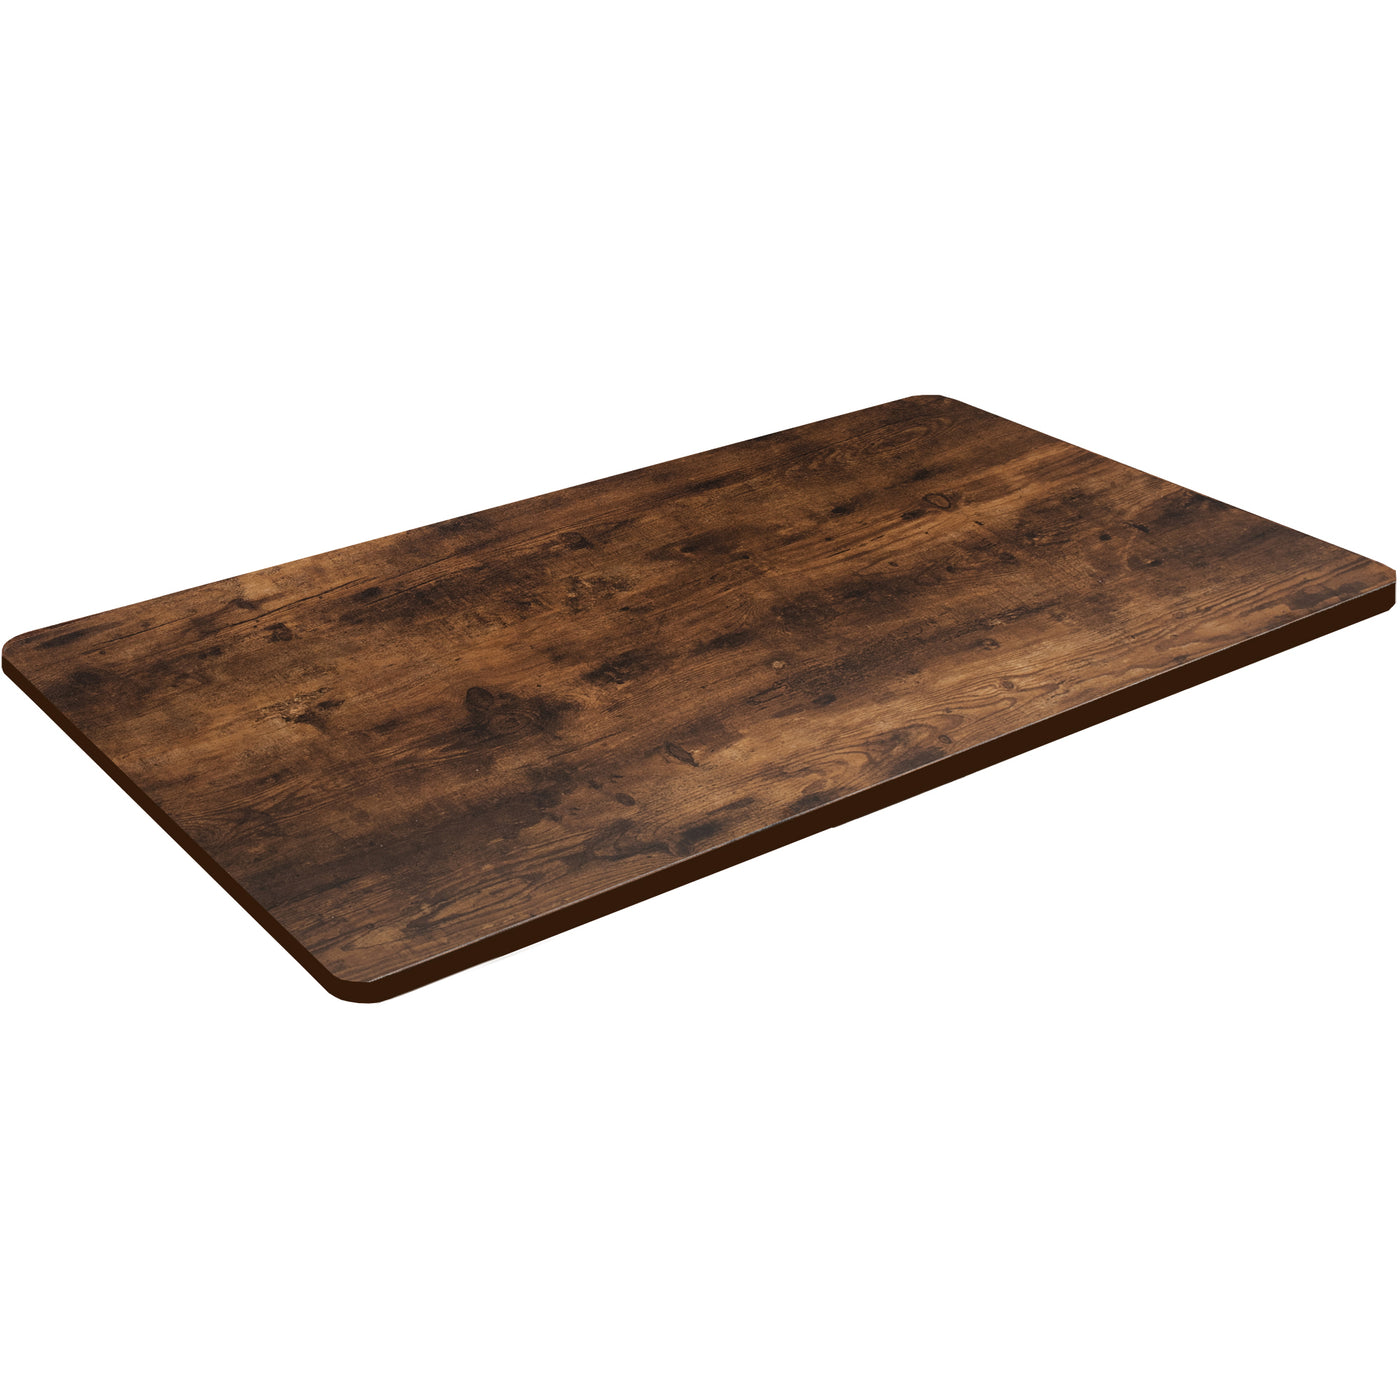 Sturdy rustic desk tabletop for sit or stand electric or manual desk frames.